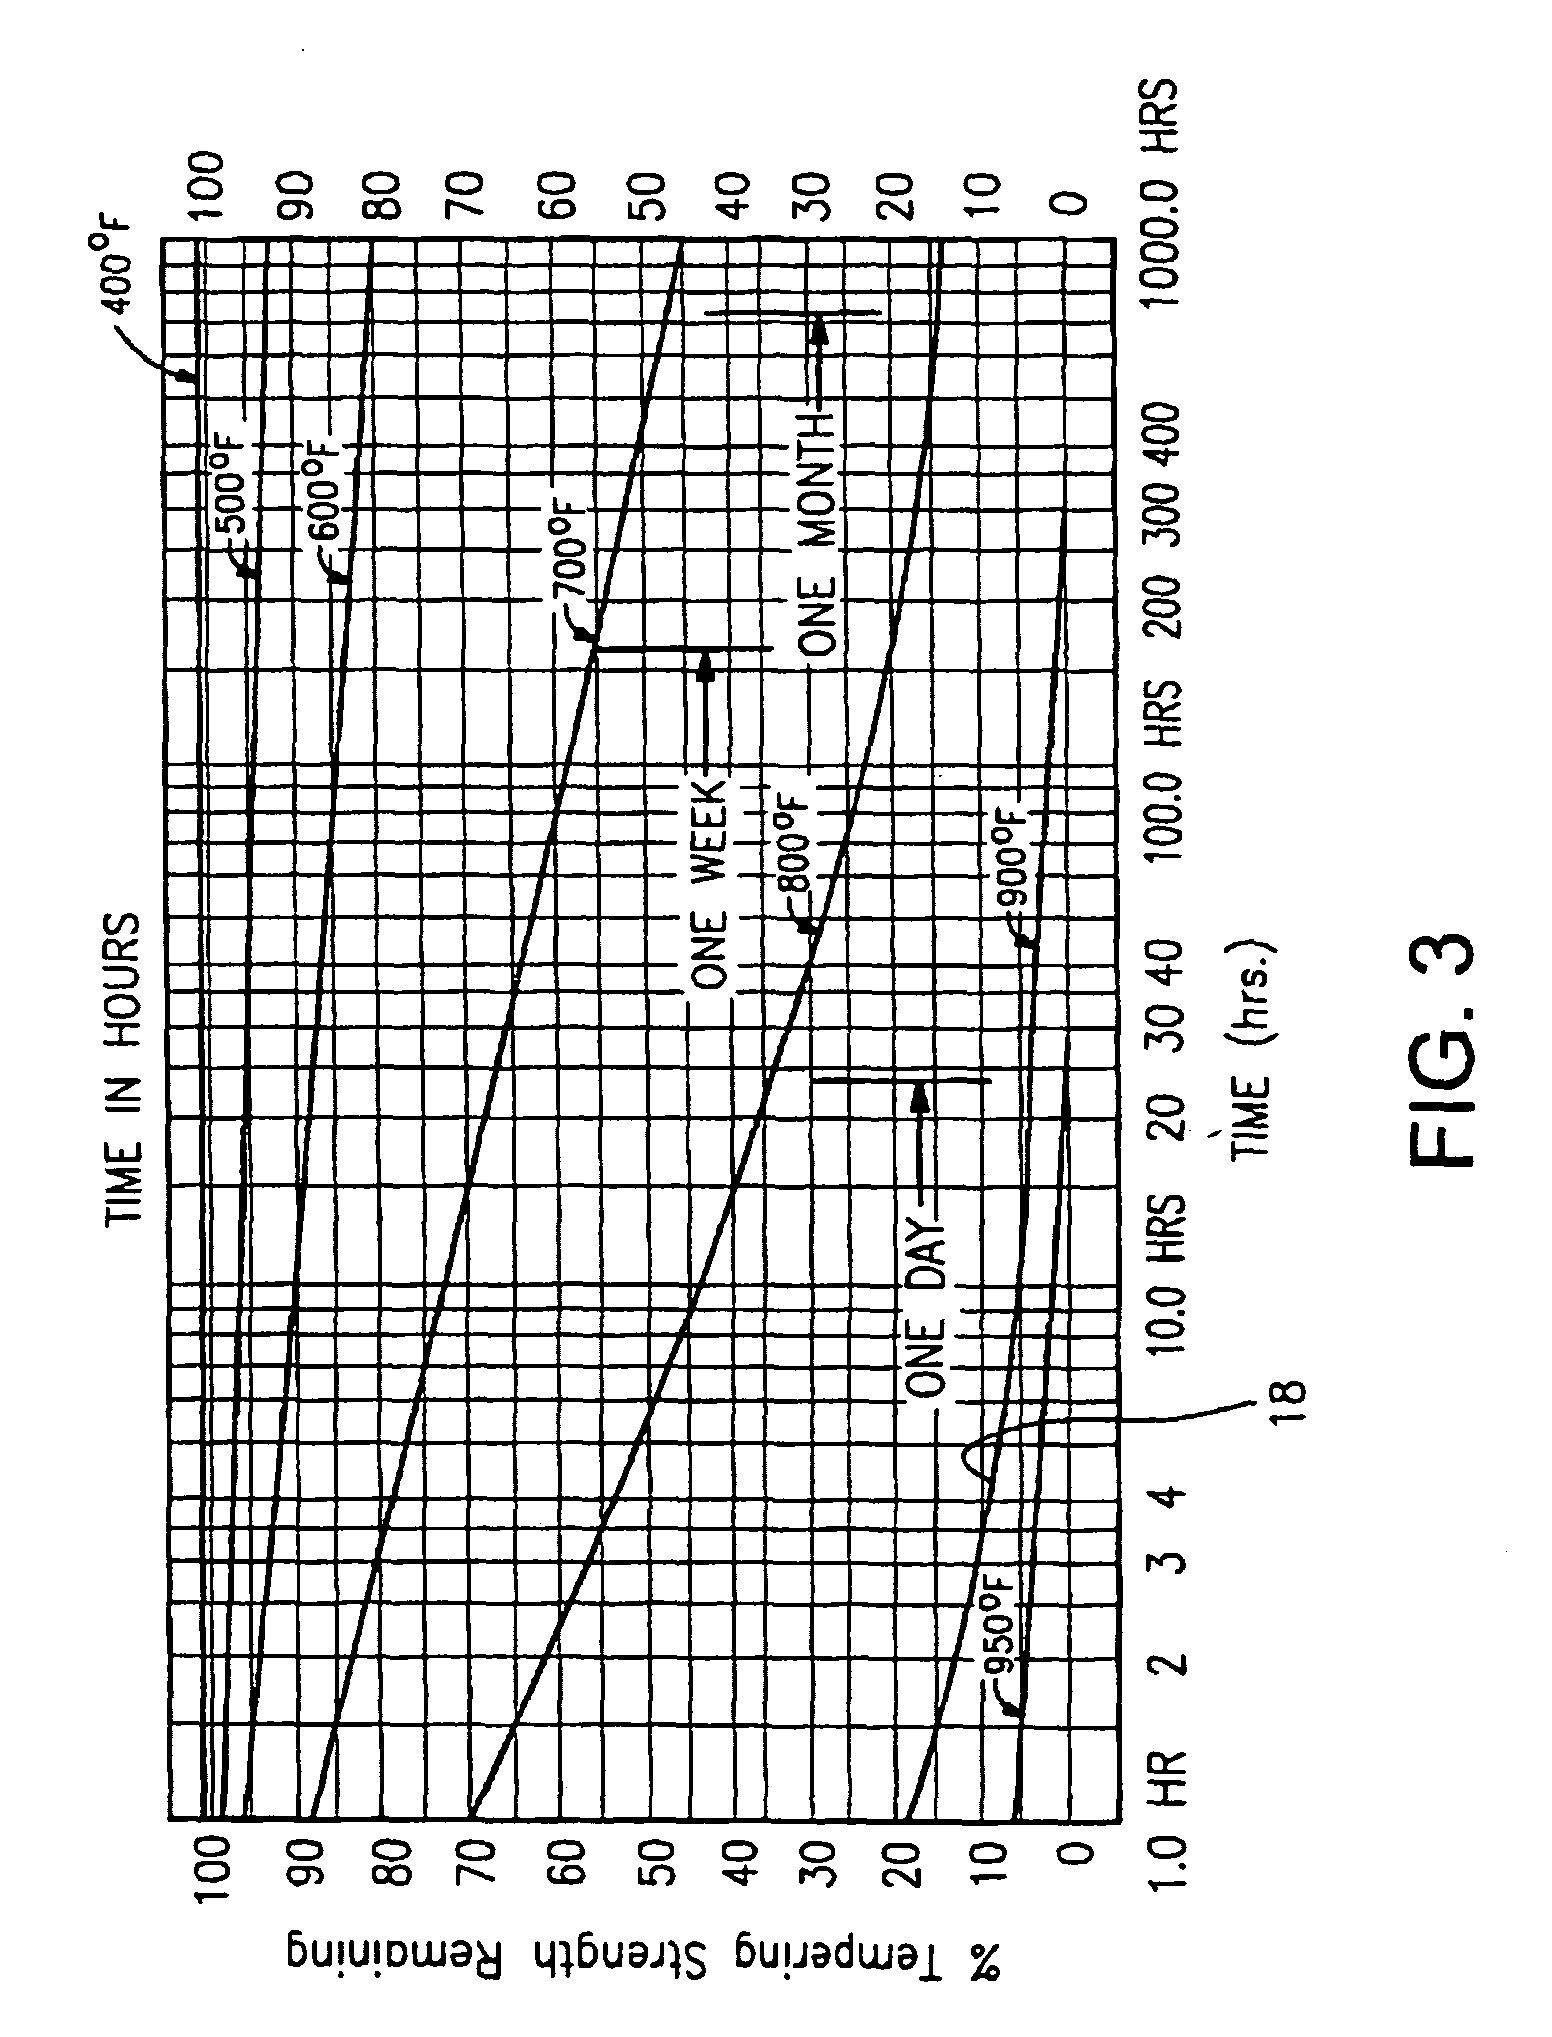 Non-toxic water-based frit slurry paste, and assembly incorporating the same